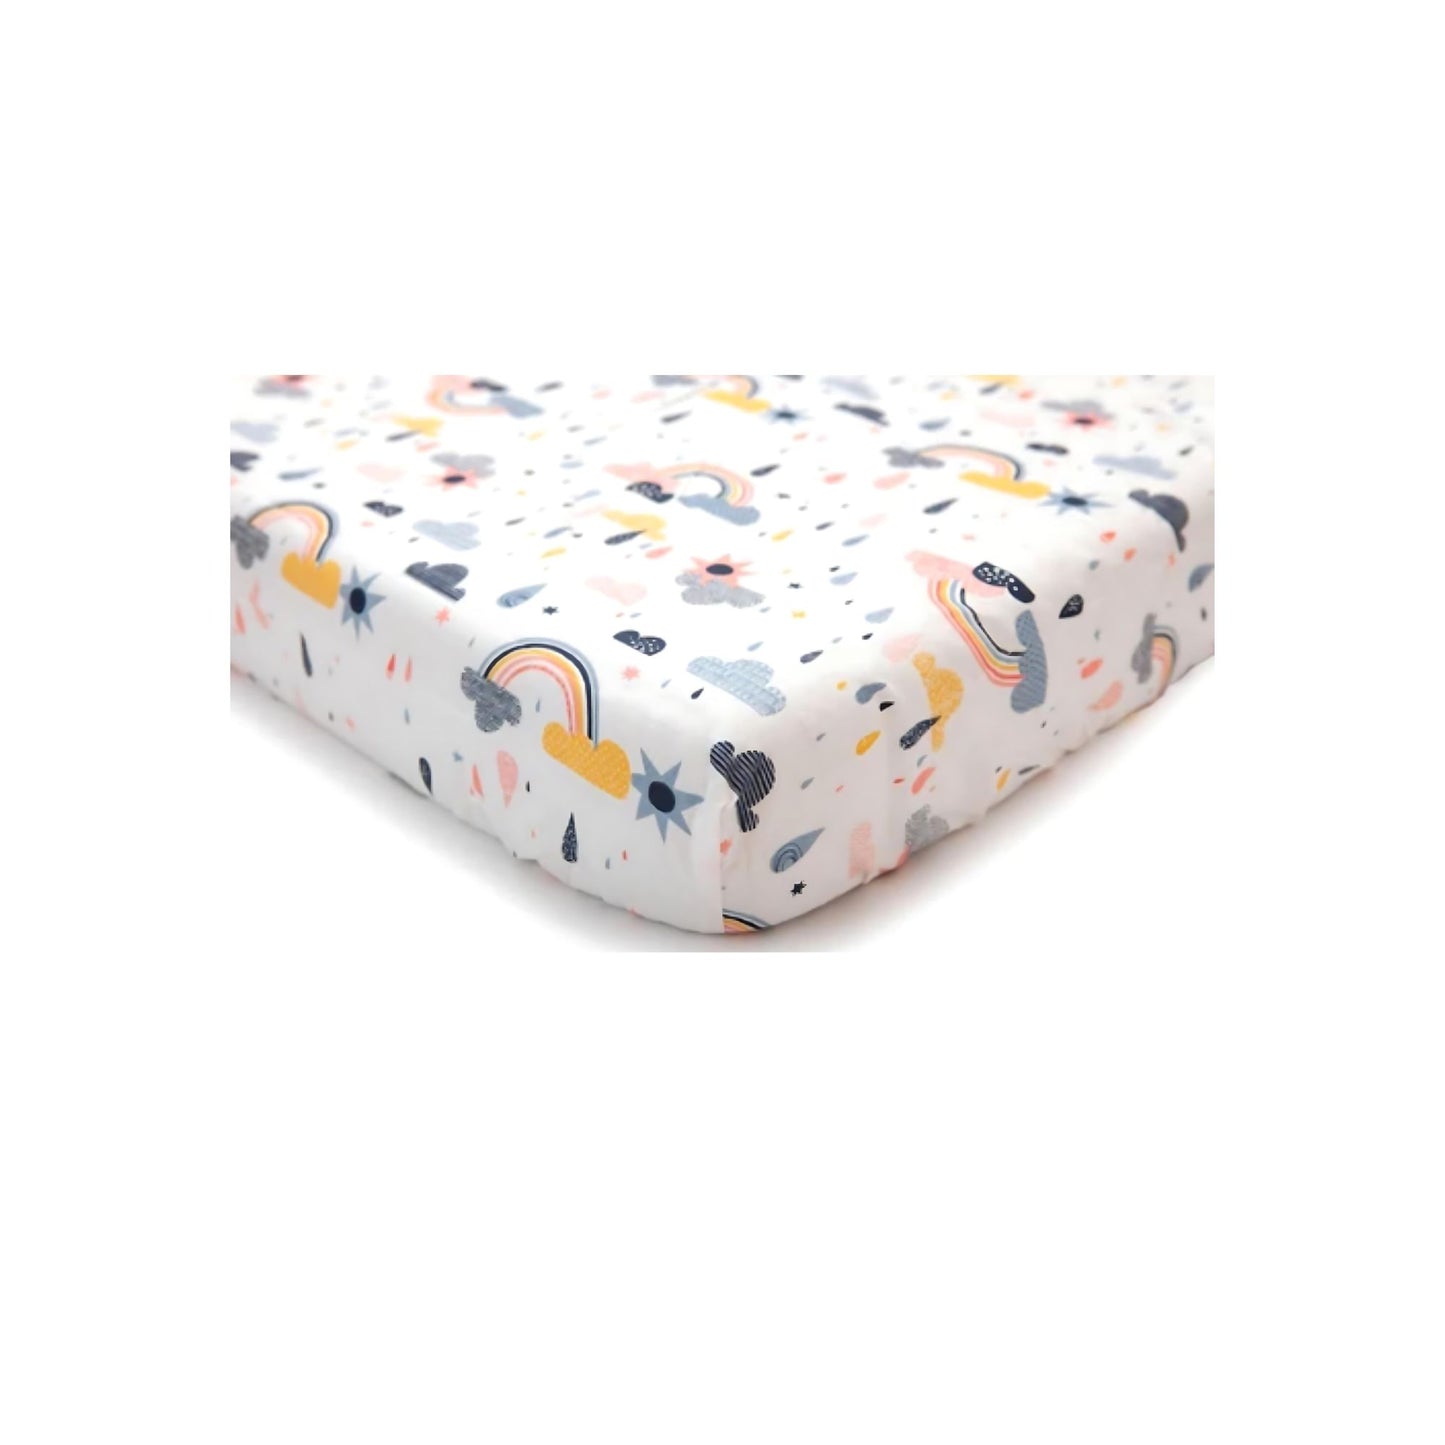 Zyji Baby Crib Fitted Sheet